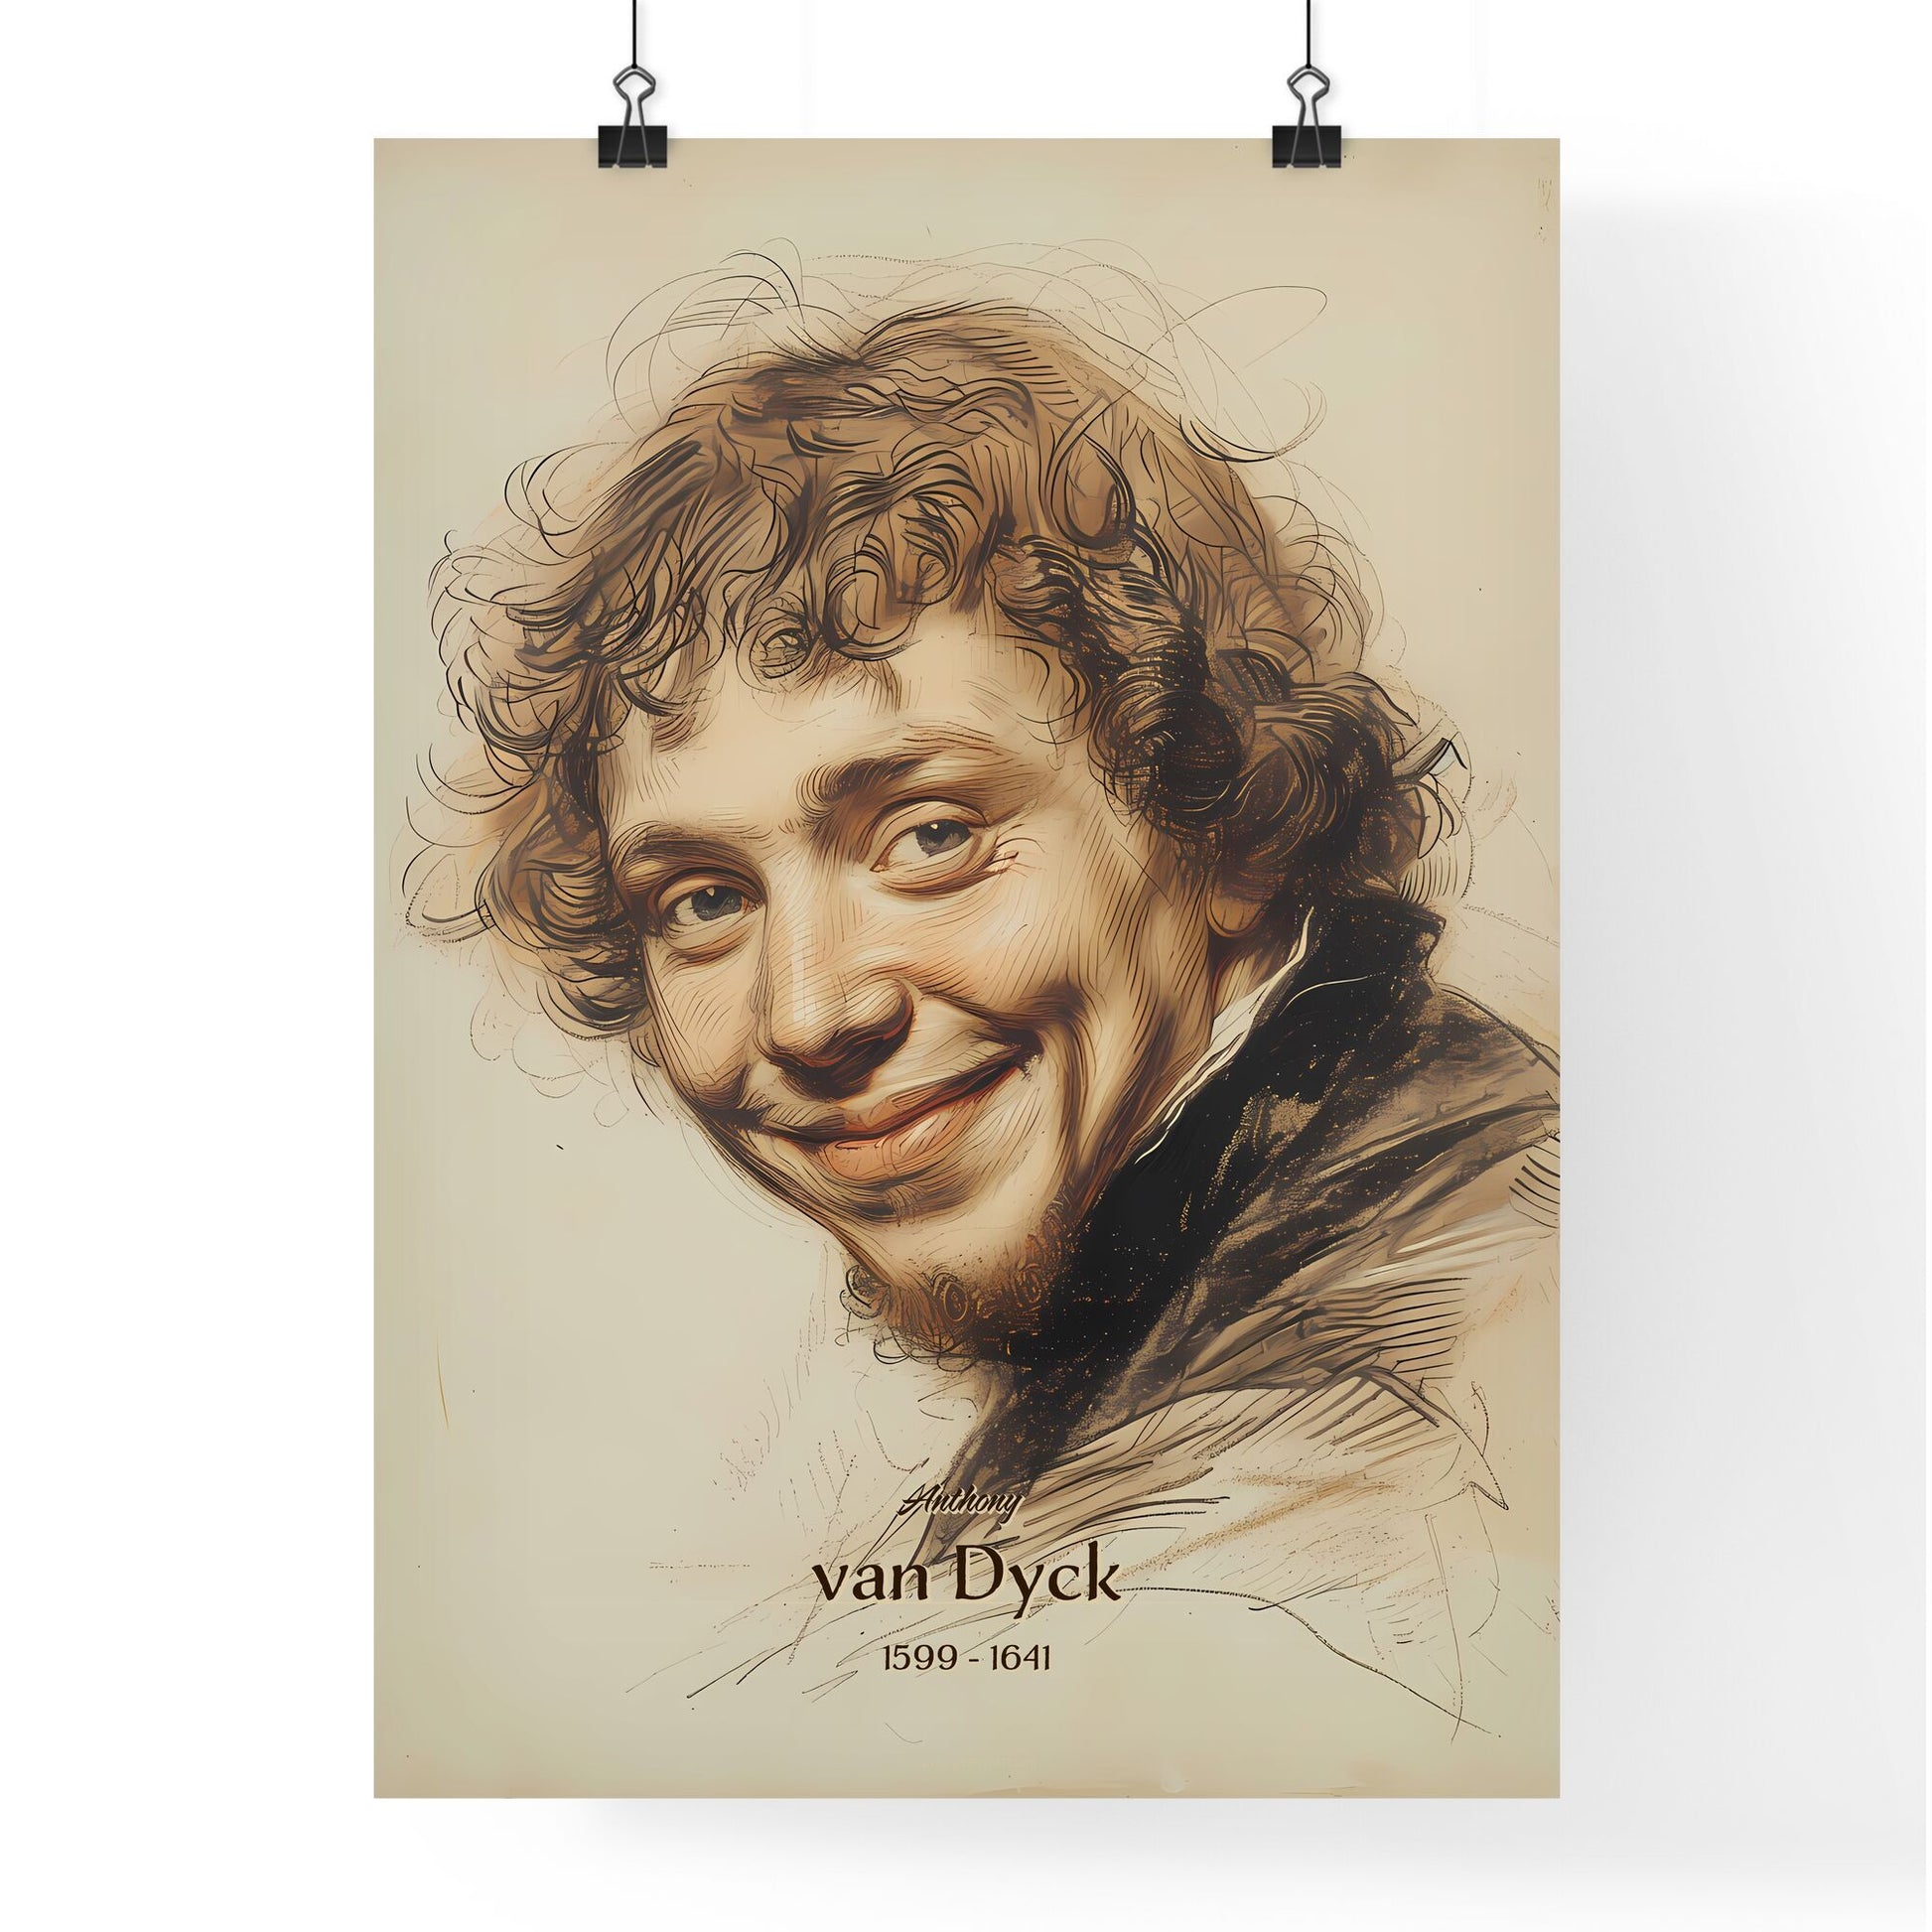 Anthony, van Dyck, 1599 - 1641, A Poster of a drawing of a man smiling Default Title